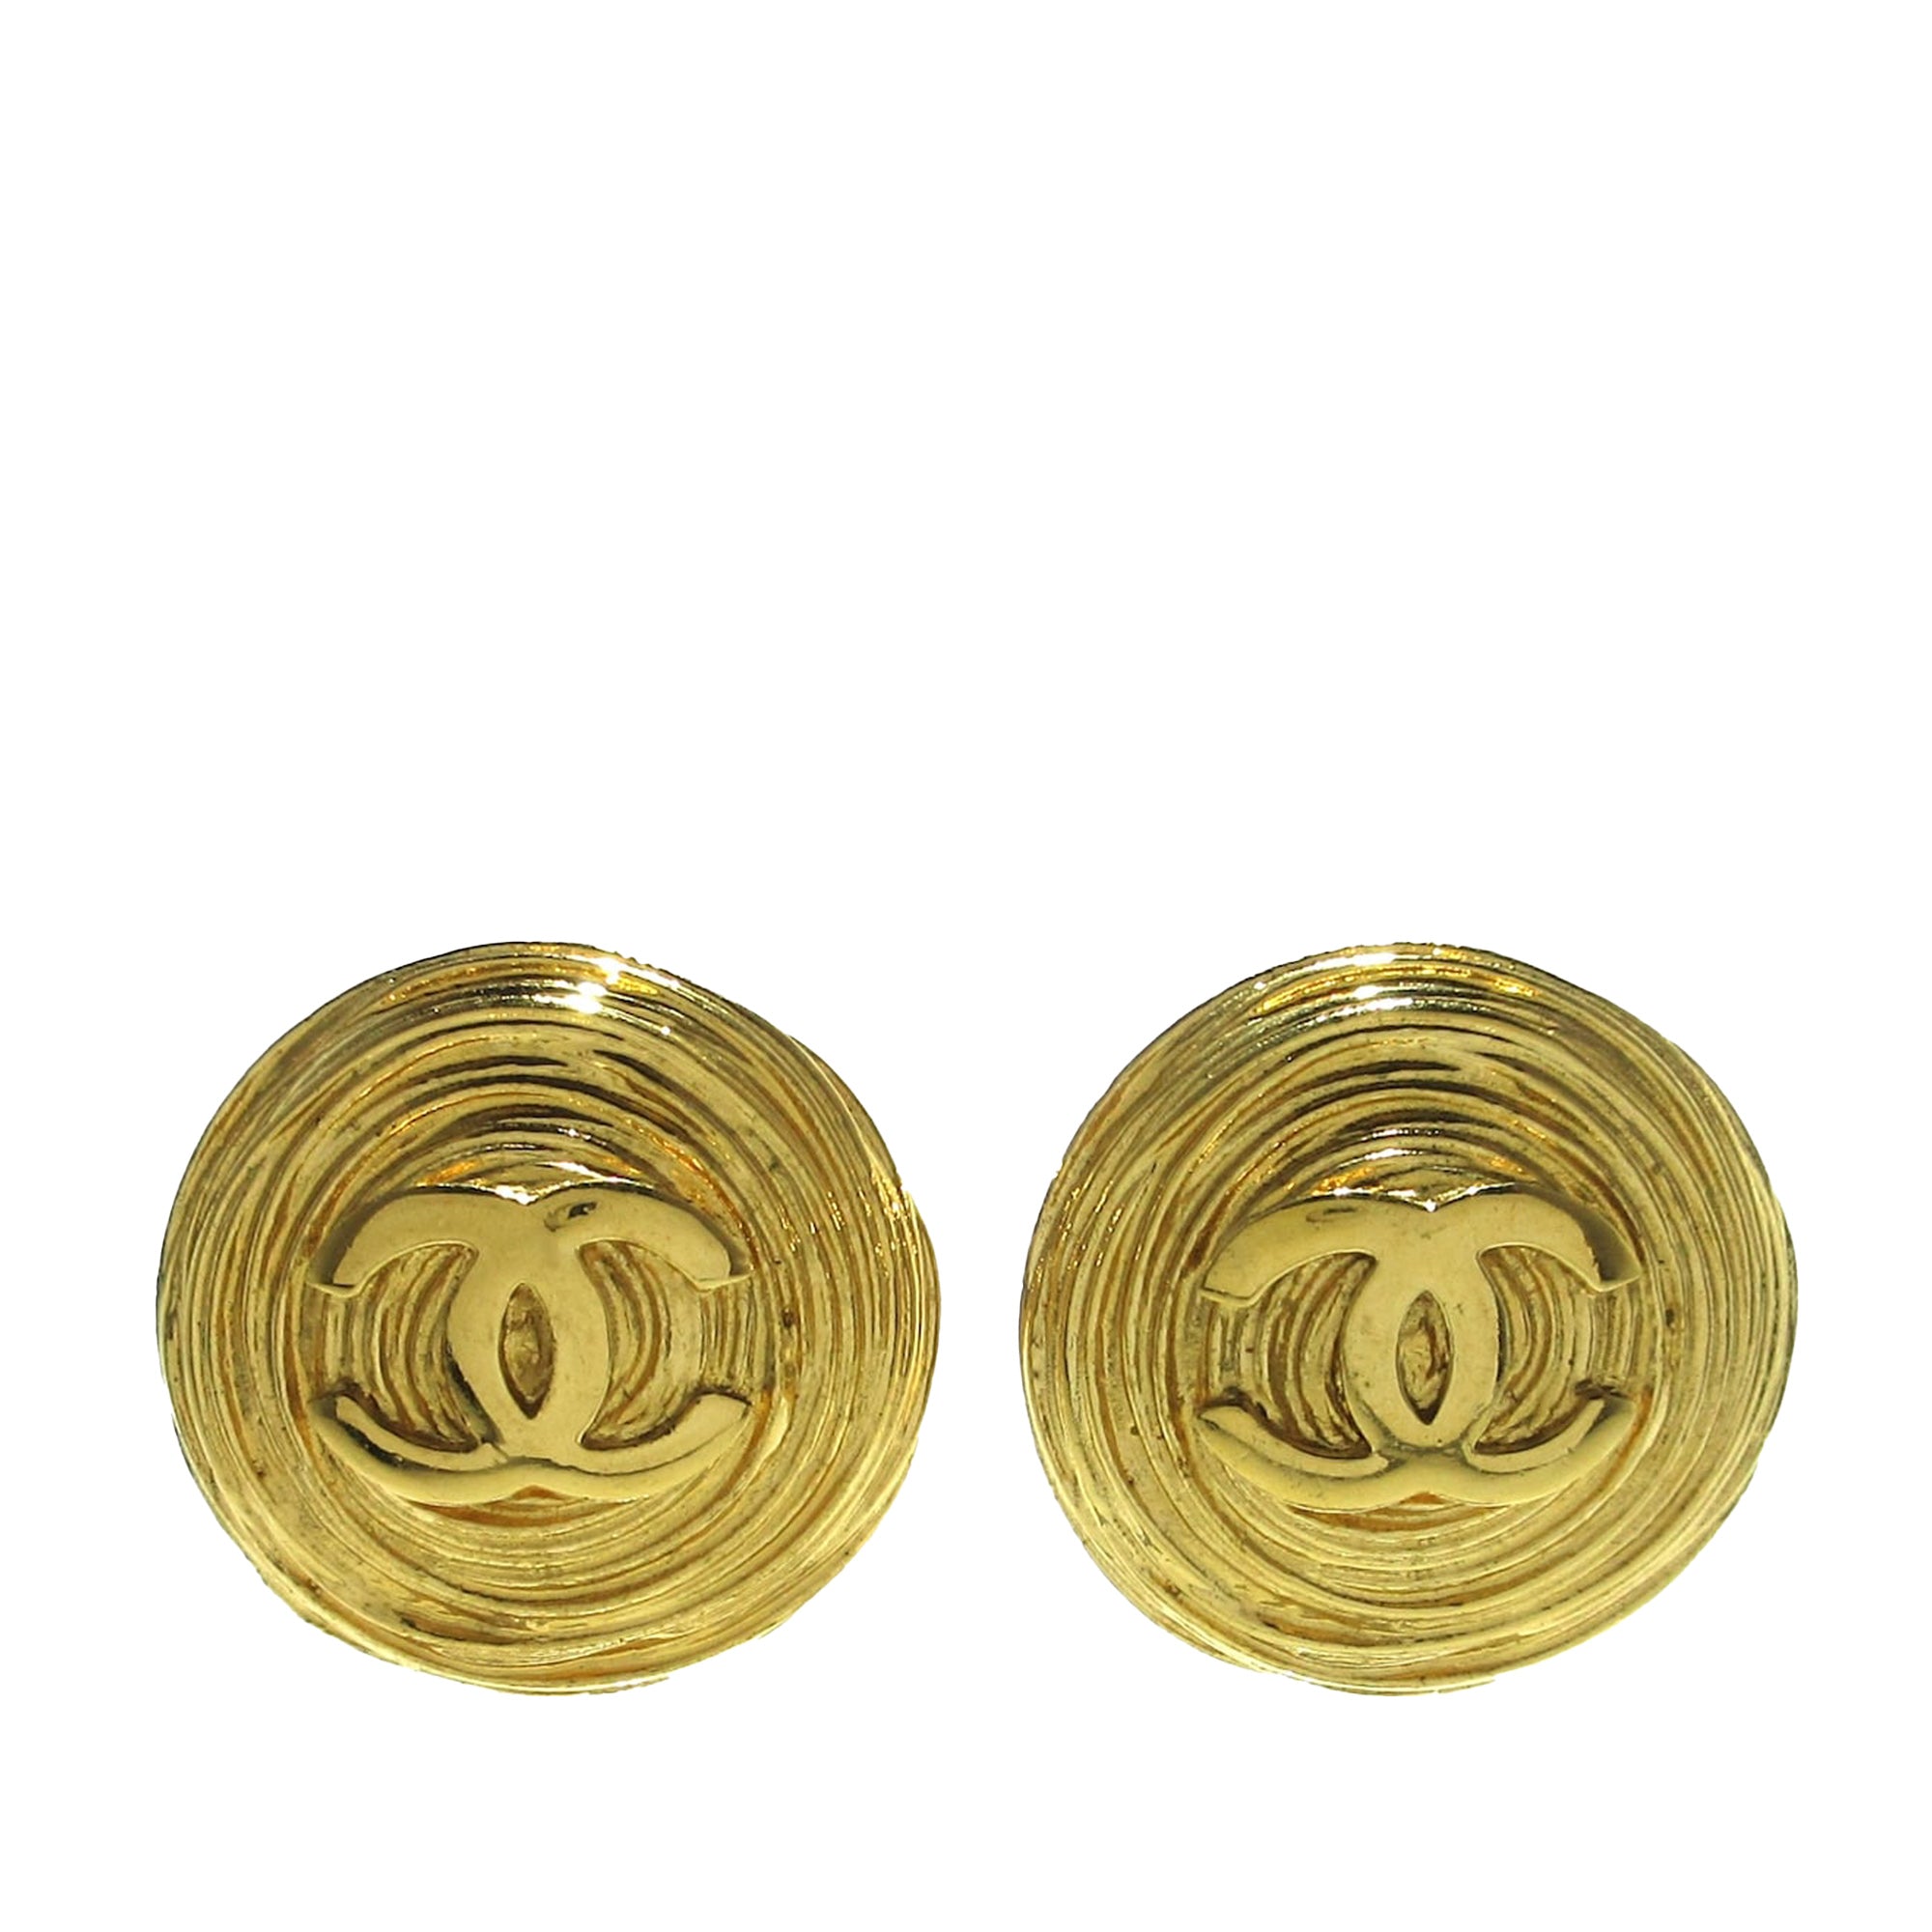 Chanel Oversized Vintage Clip Earrings, Plated In 24ct Gold, Designed As  Interlocking 'cc' Logos  Auction